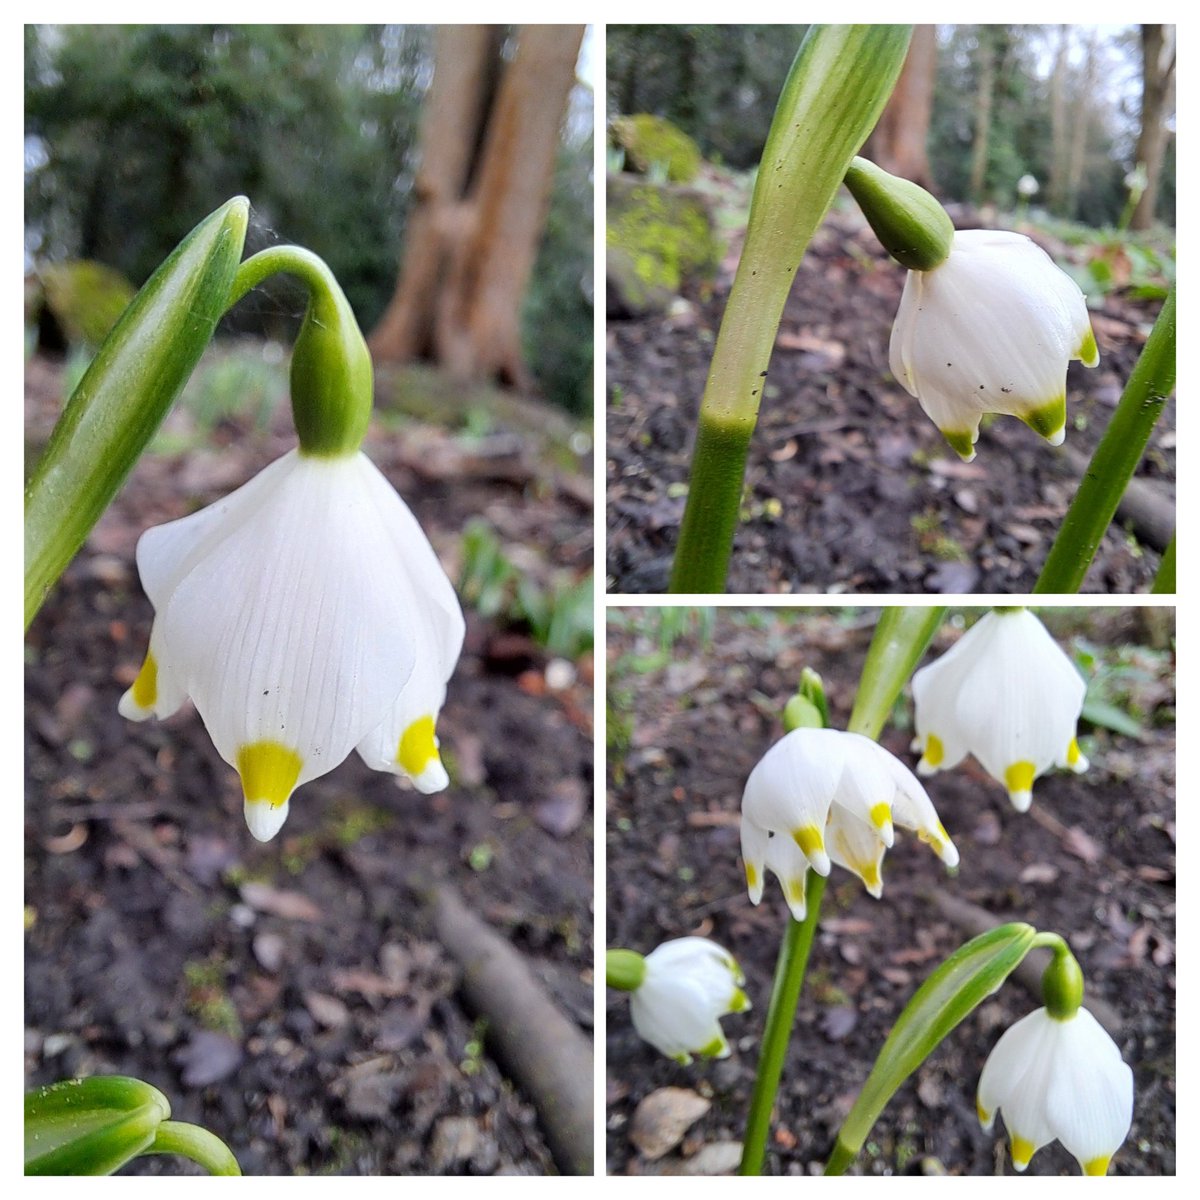 Amongst the snowdrops you might see their little lookalike friends- Leucojam, known as snowflakes ❄️. So much 🌧🌧 to come, hope all the little flowers don't get too crushed 😔. Happy Thursday 🌿